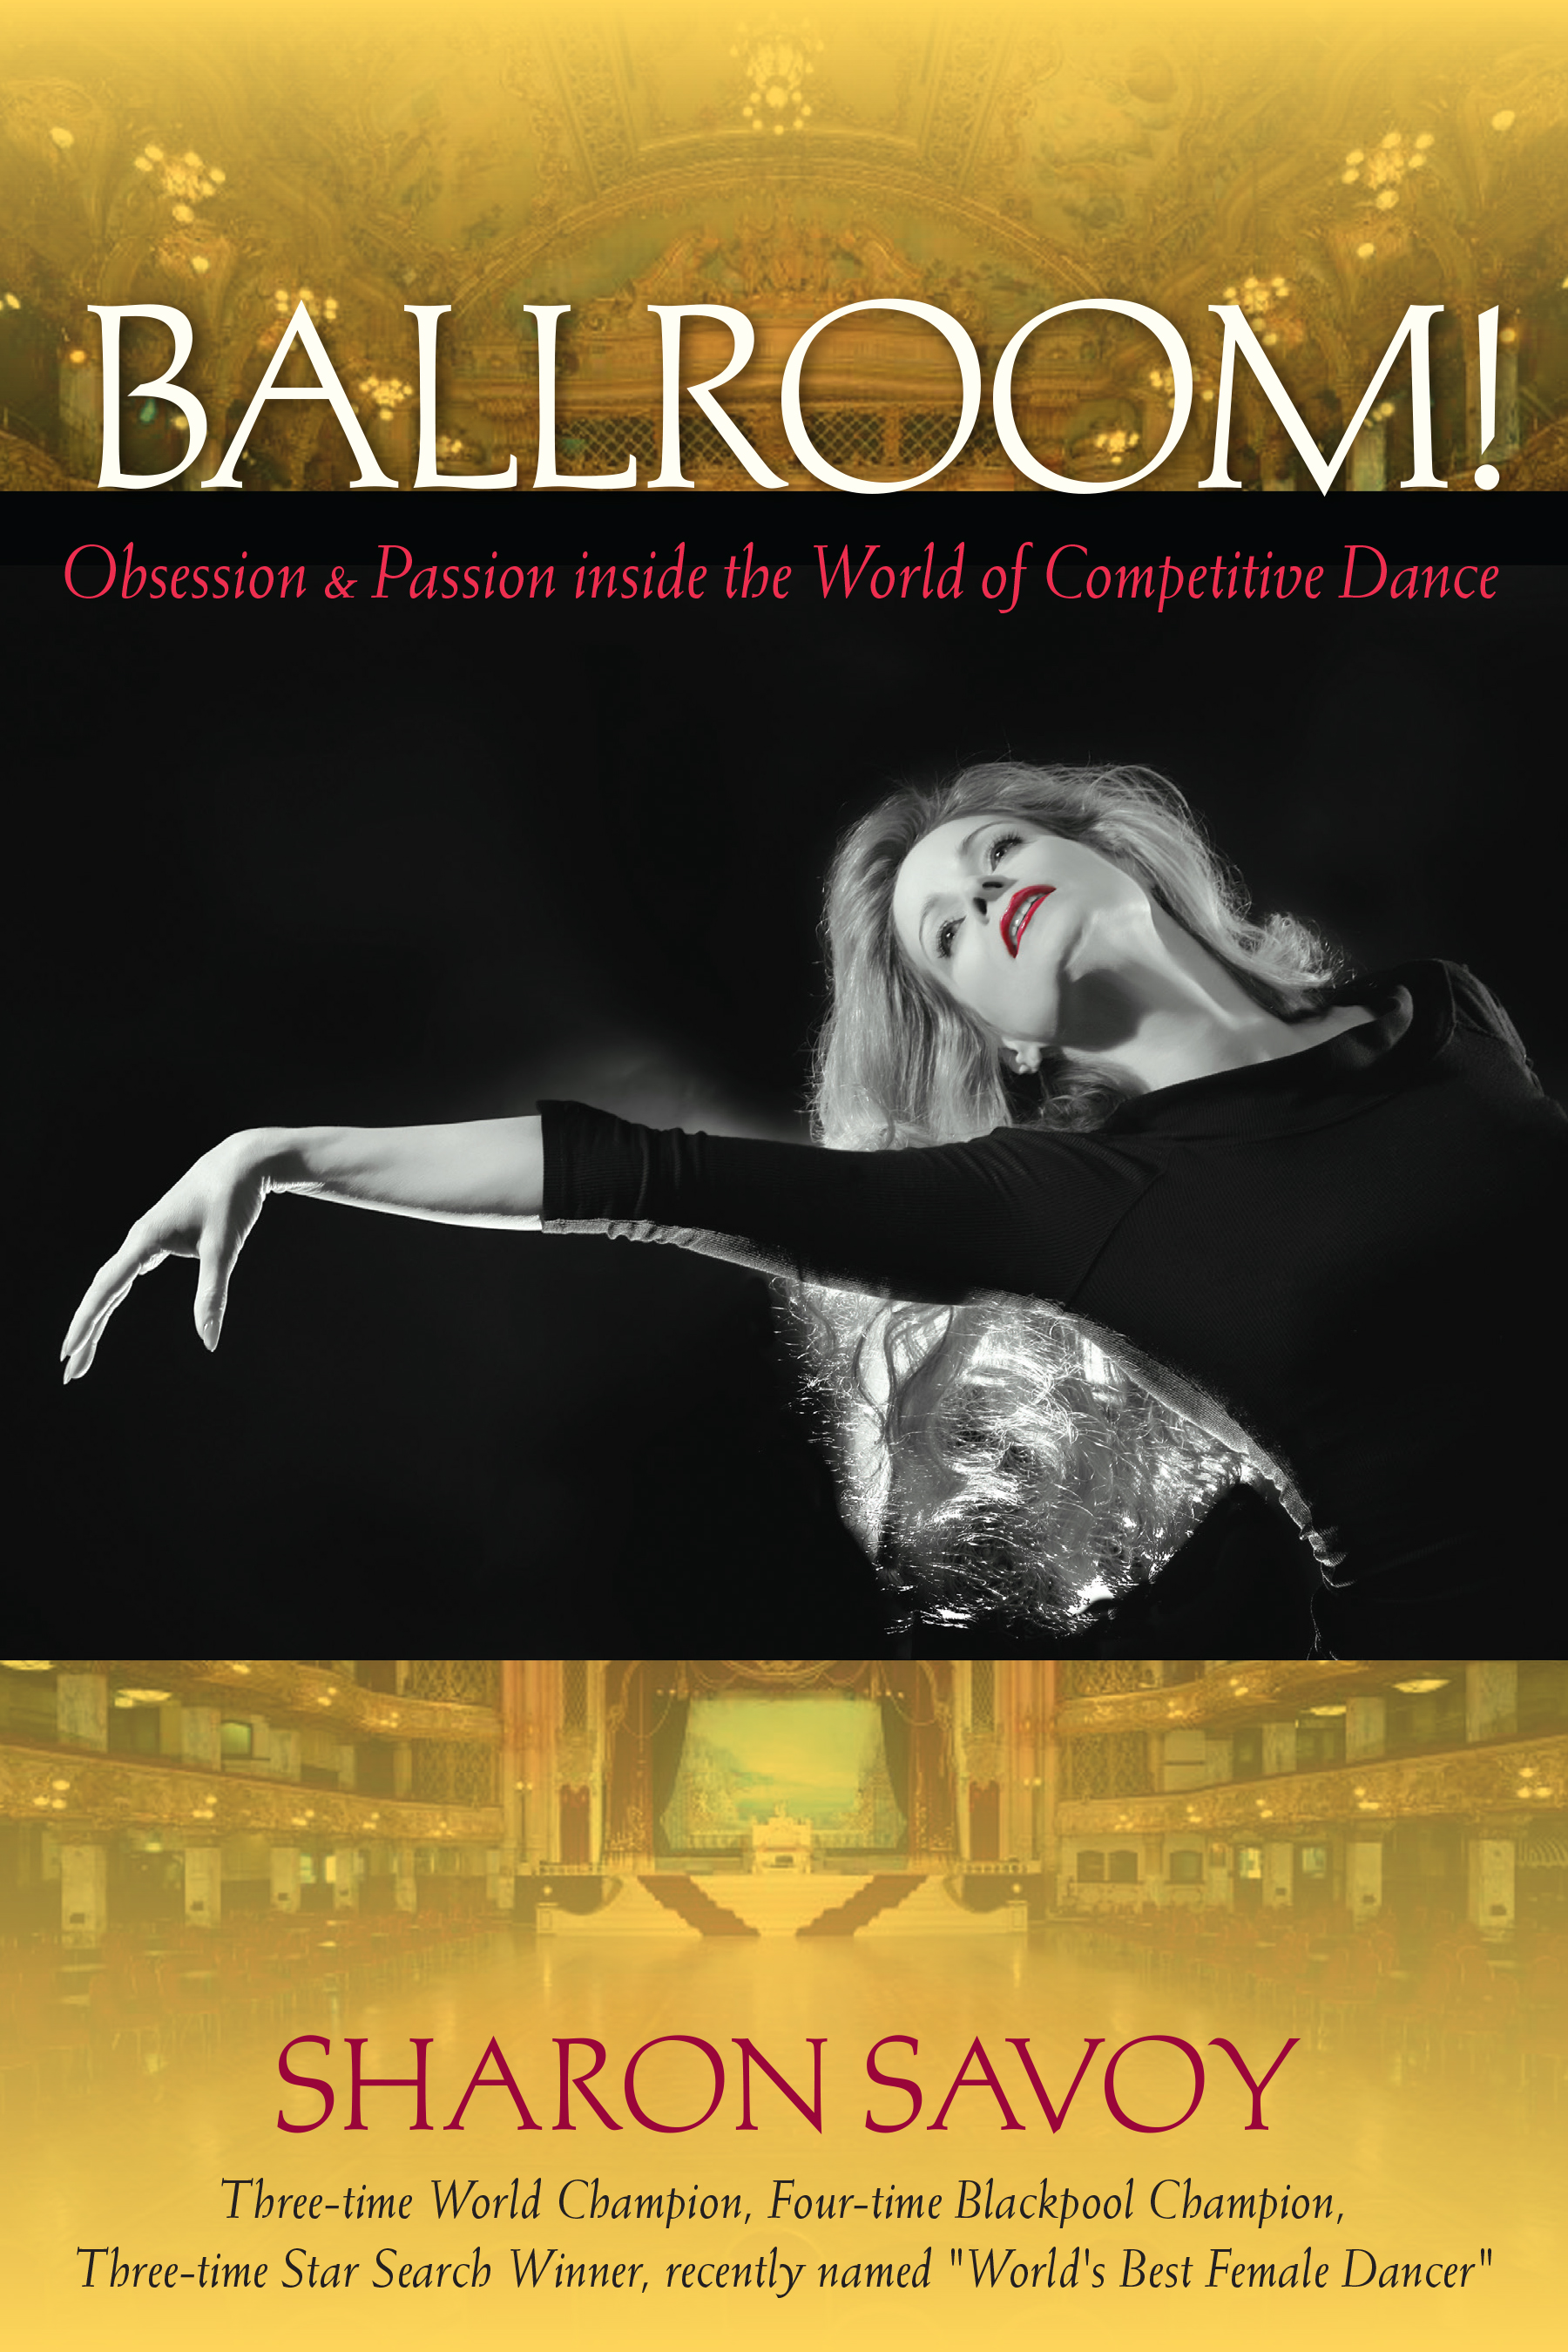 Author of Ballroom! published by UPF, 2010